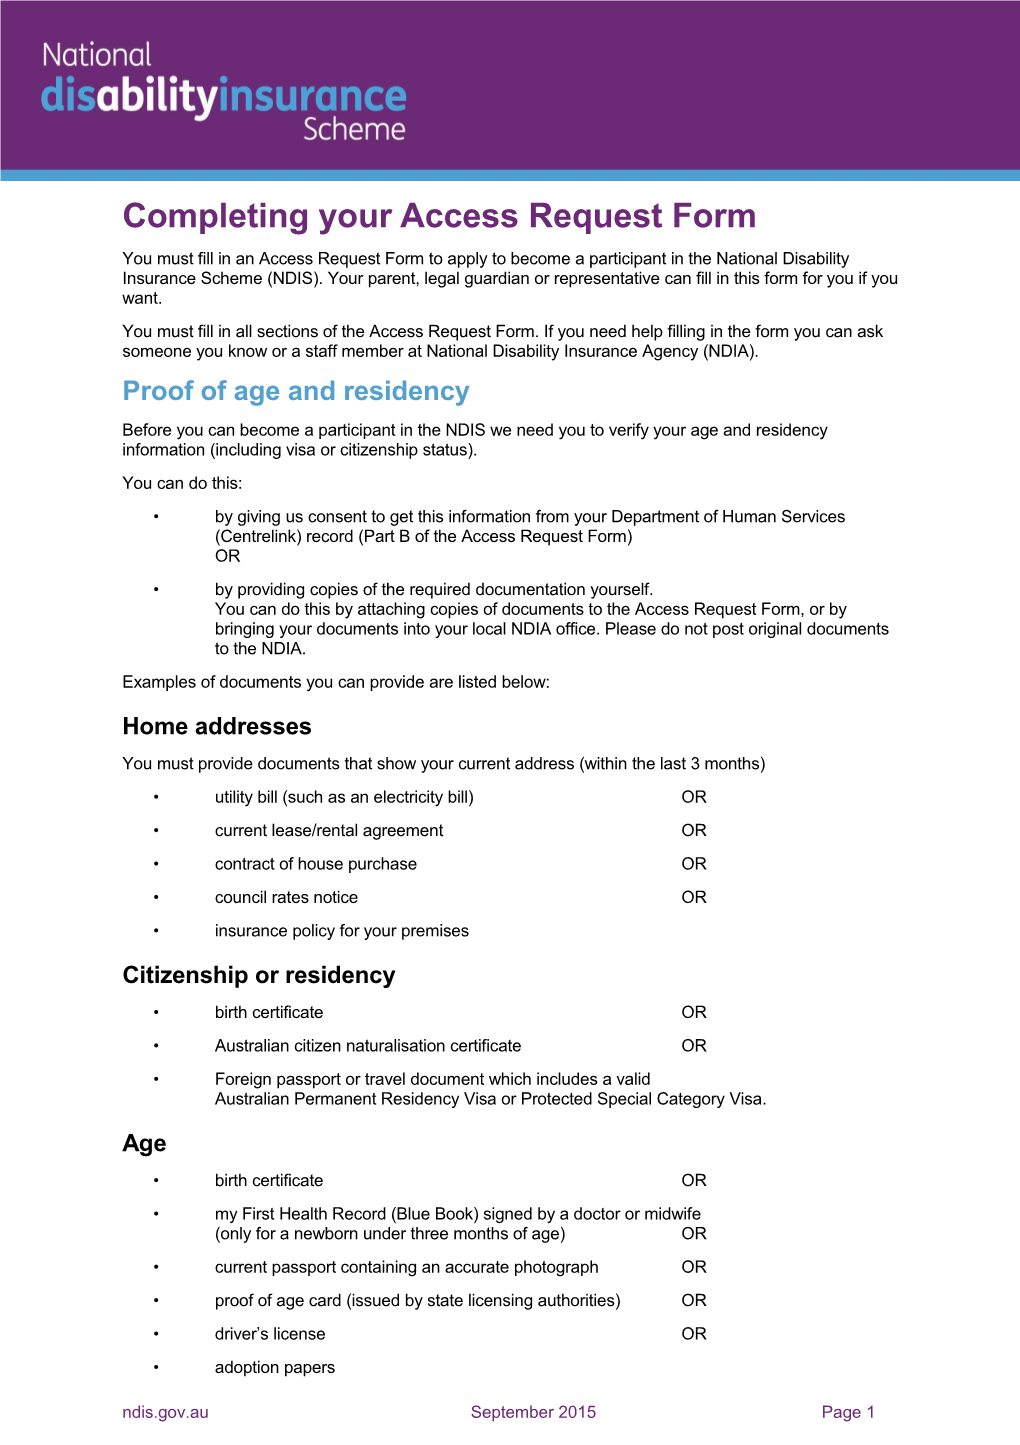 Completing Your Access Request Form